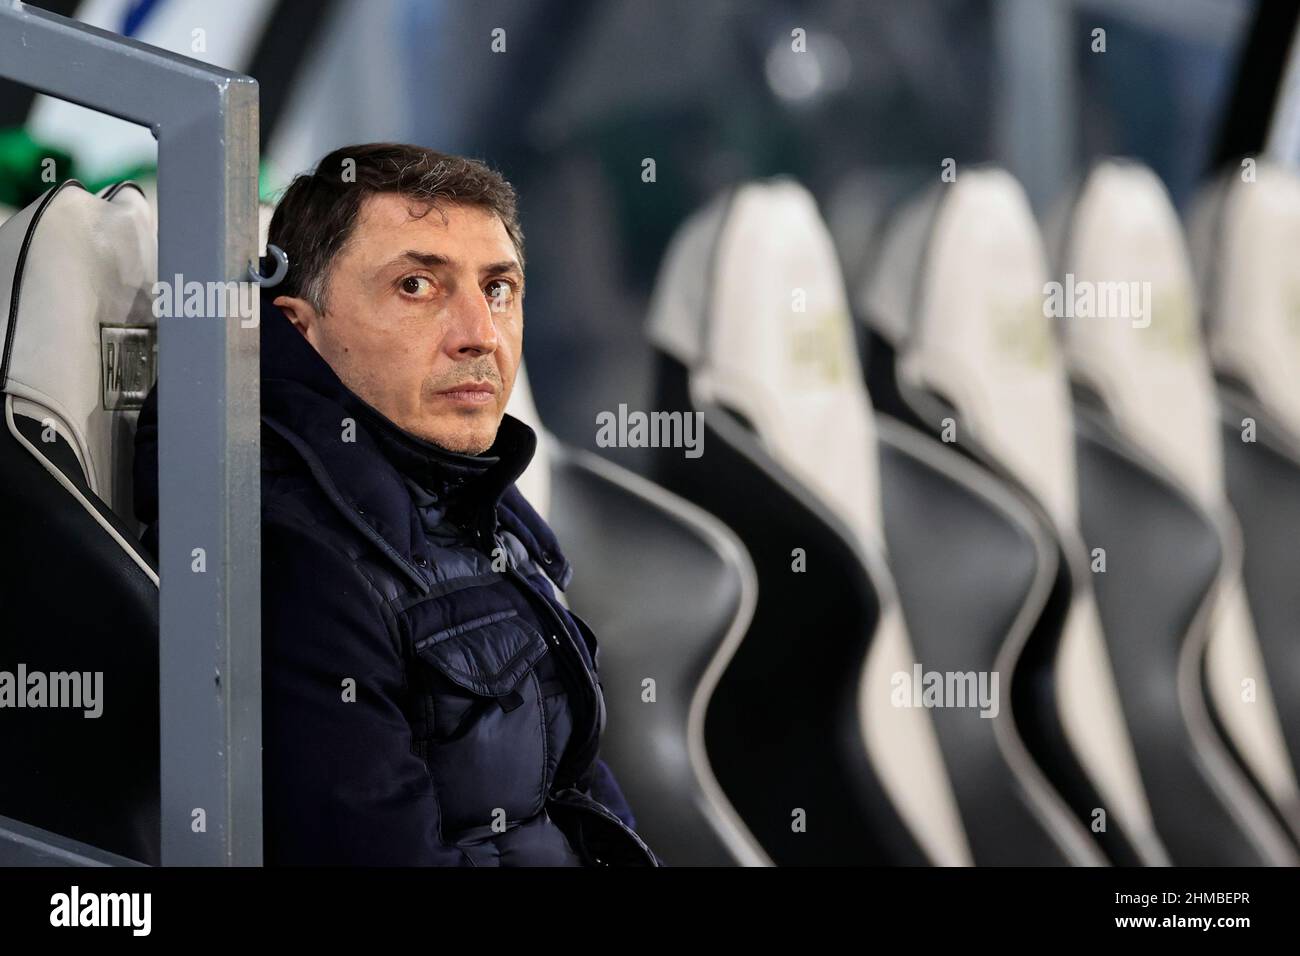 Shota Arveladze the Hull City manager waits in the dug out before the game Stock Photo